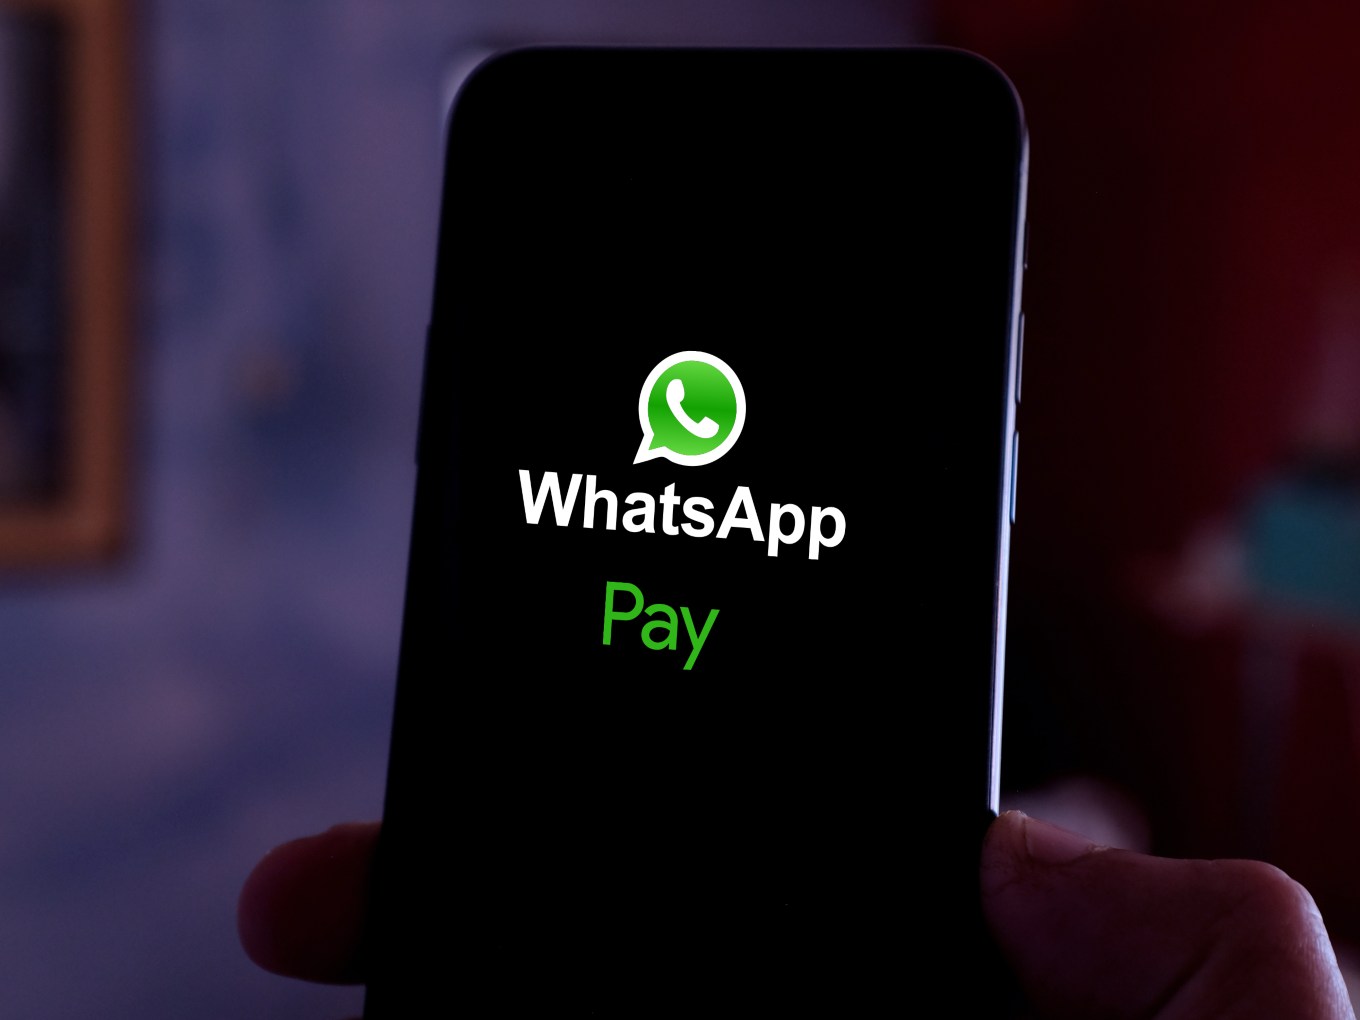 WhatsApp Payments Looks To Woo Banking Partners To Expand India Fintech Play